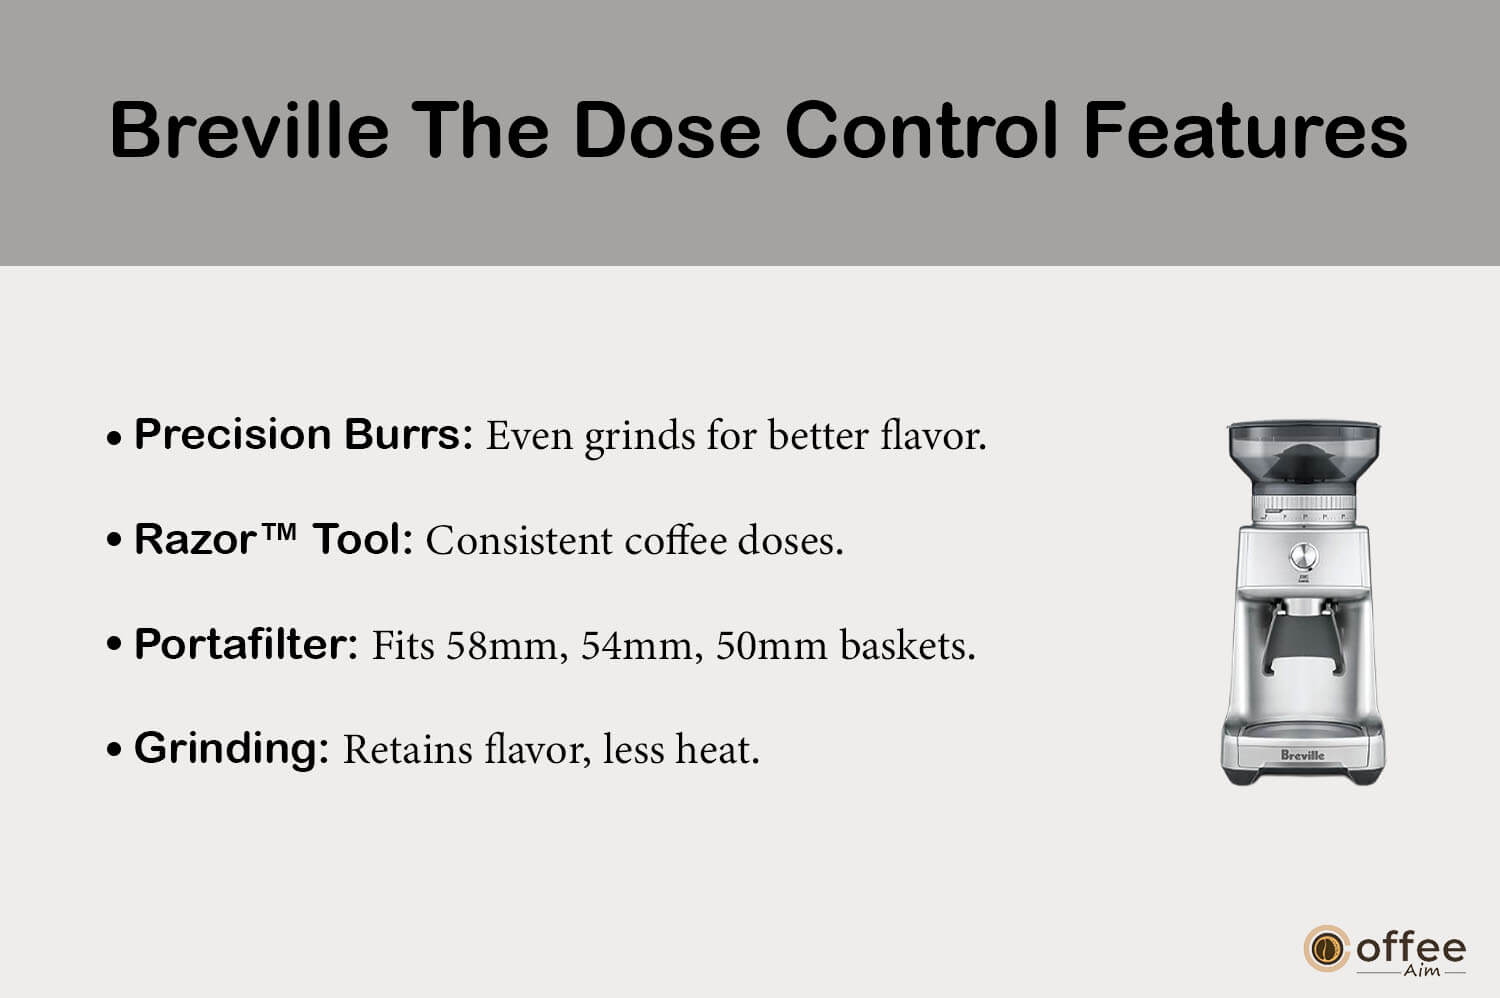 This image highlights the features of "Breville The Dose Control" as detailed in the article "Breville The Dose Control Review."